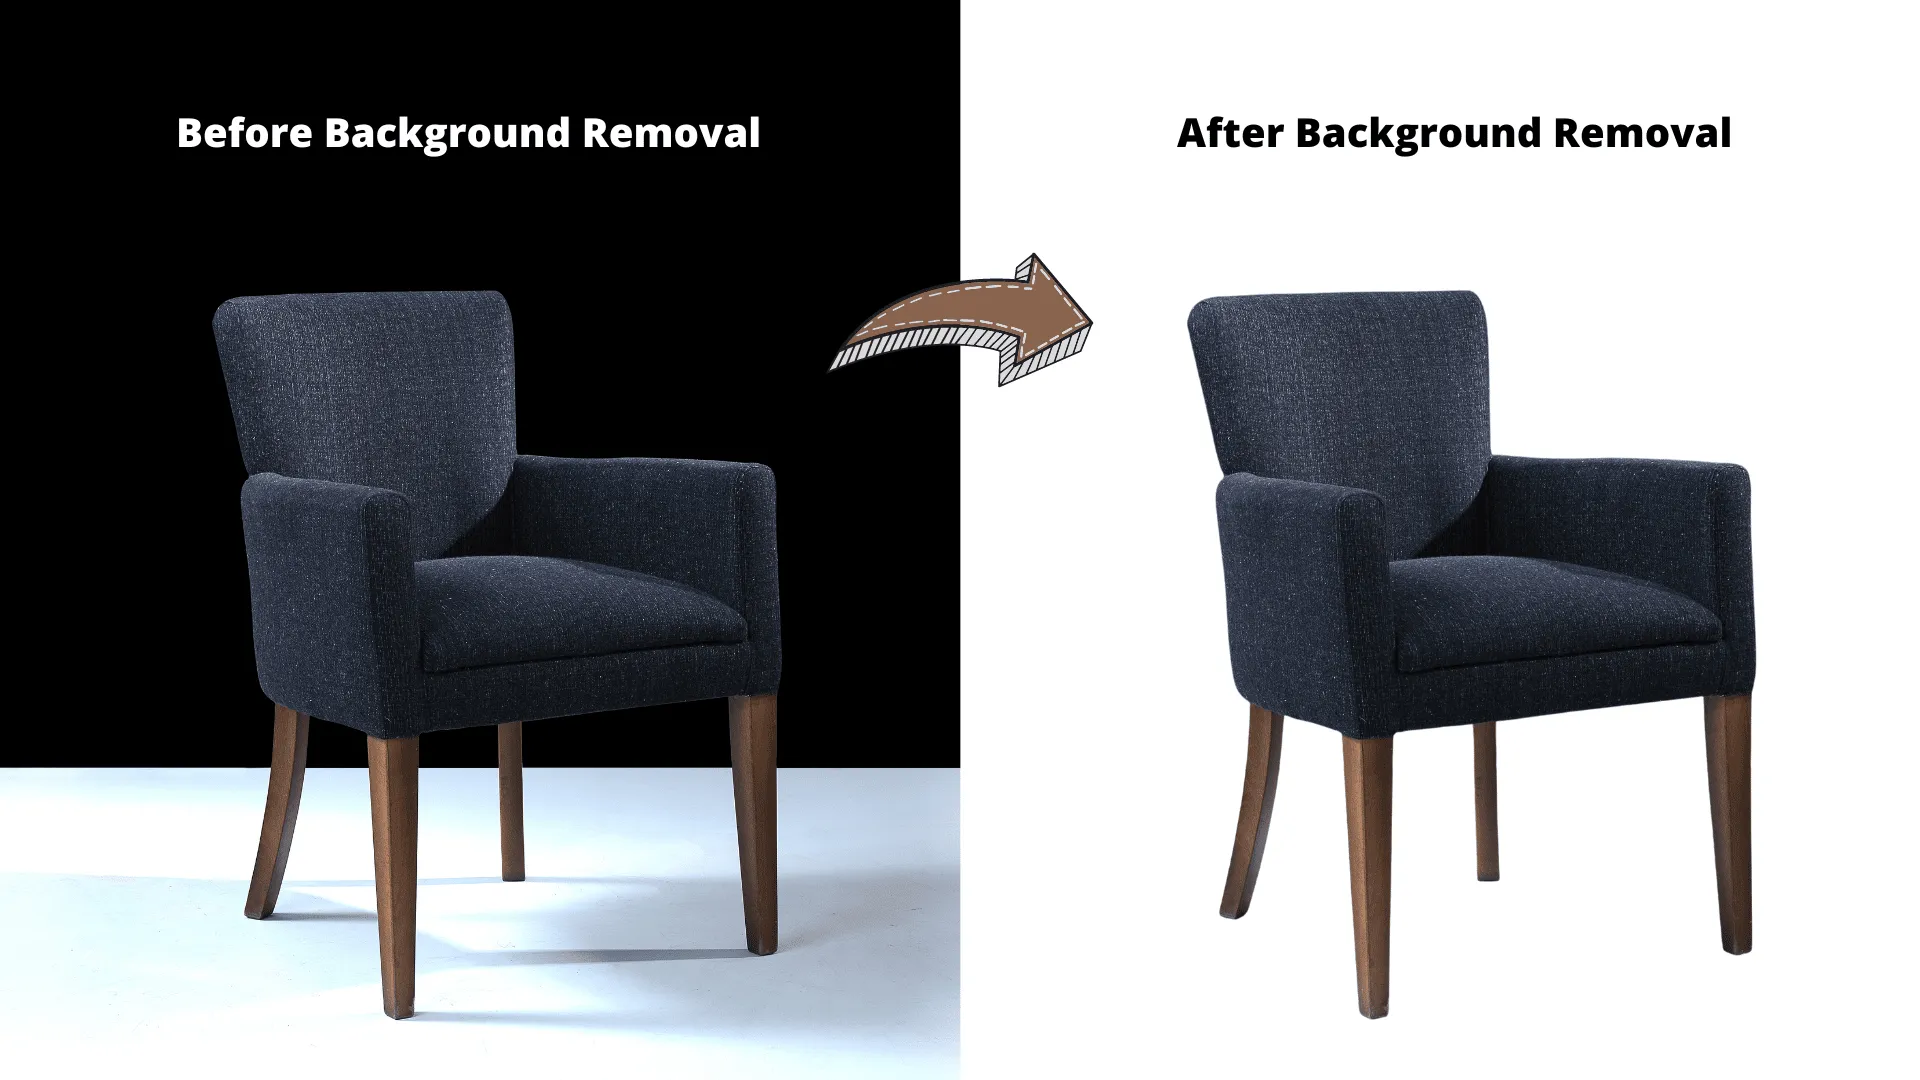 Background Removal for Catalog Building